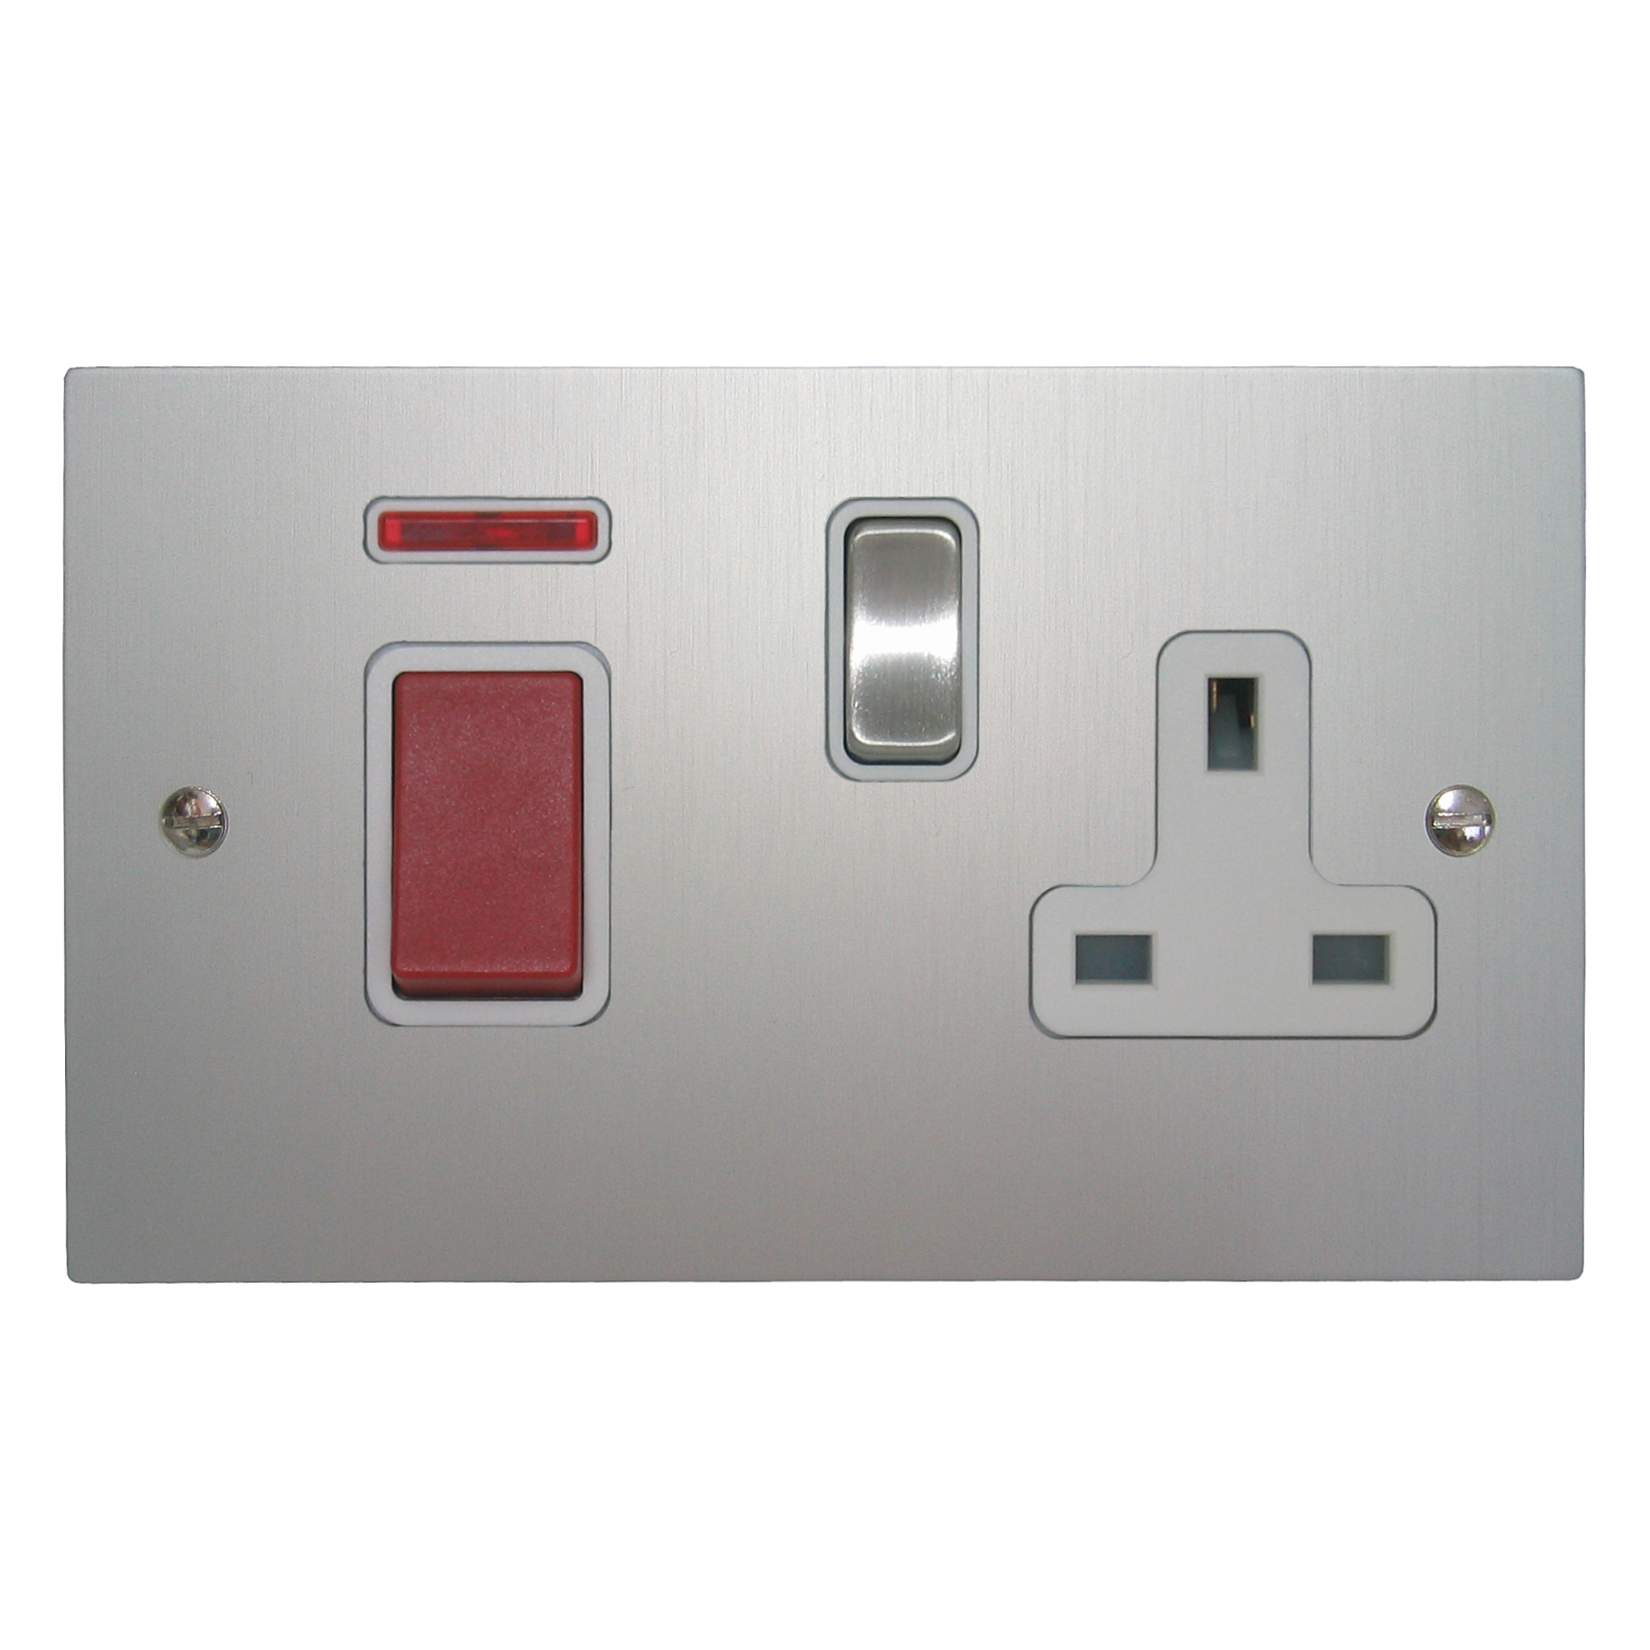 Cooker Switch 2 gang plate 45 amp cooker switch socket outlet ...